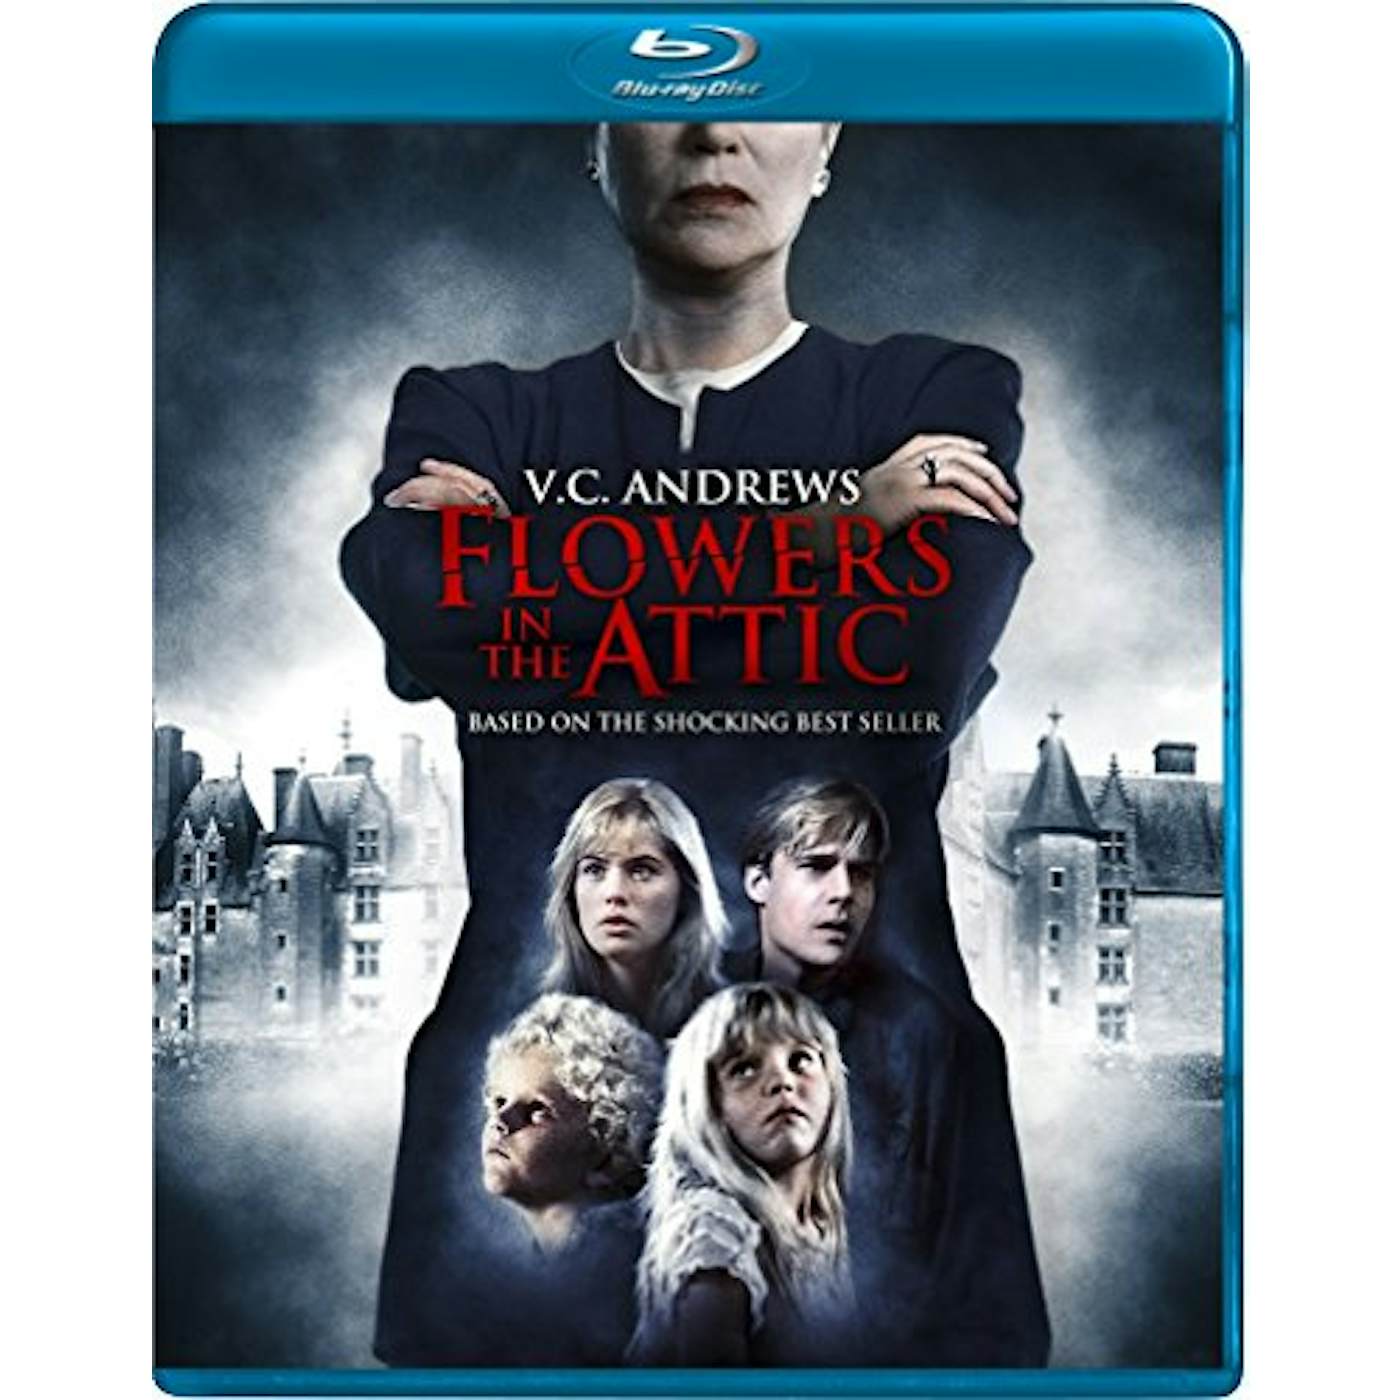 FLOWERS IN THE ATTIC Blu-ray